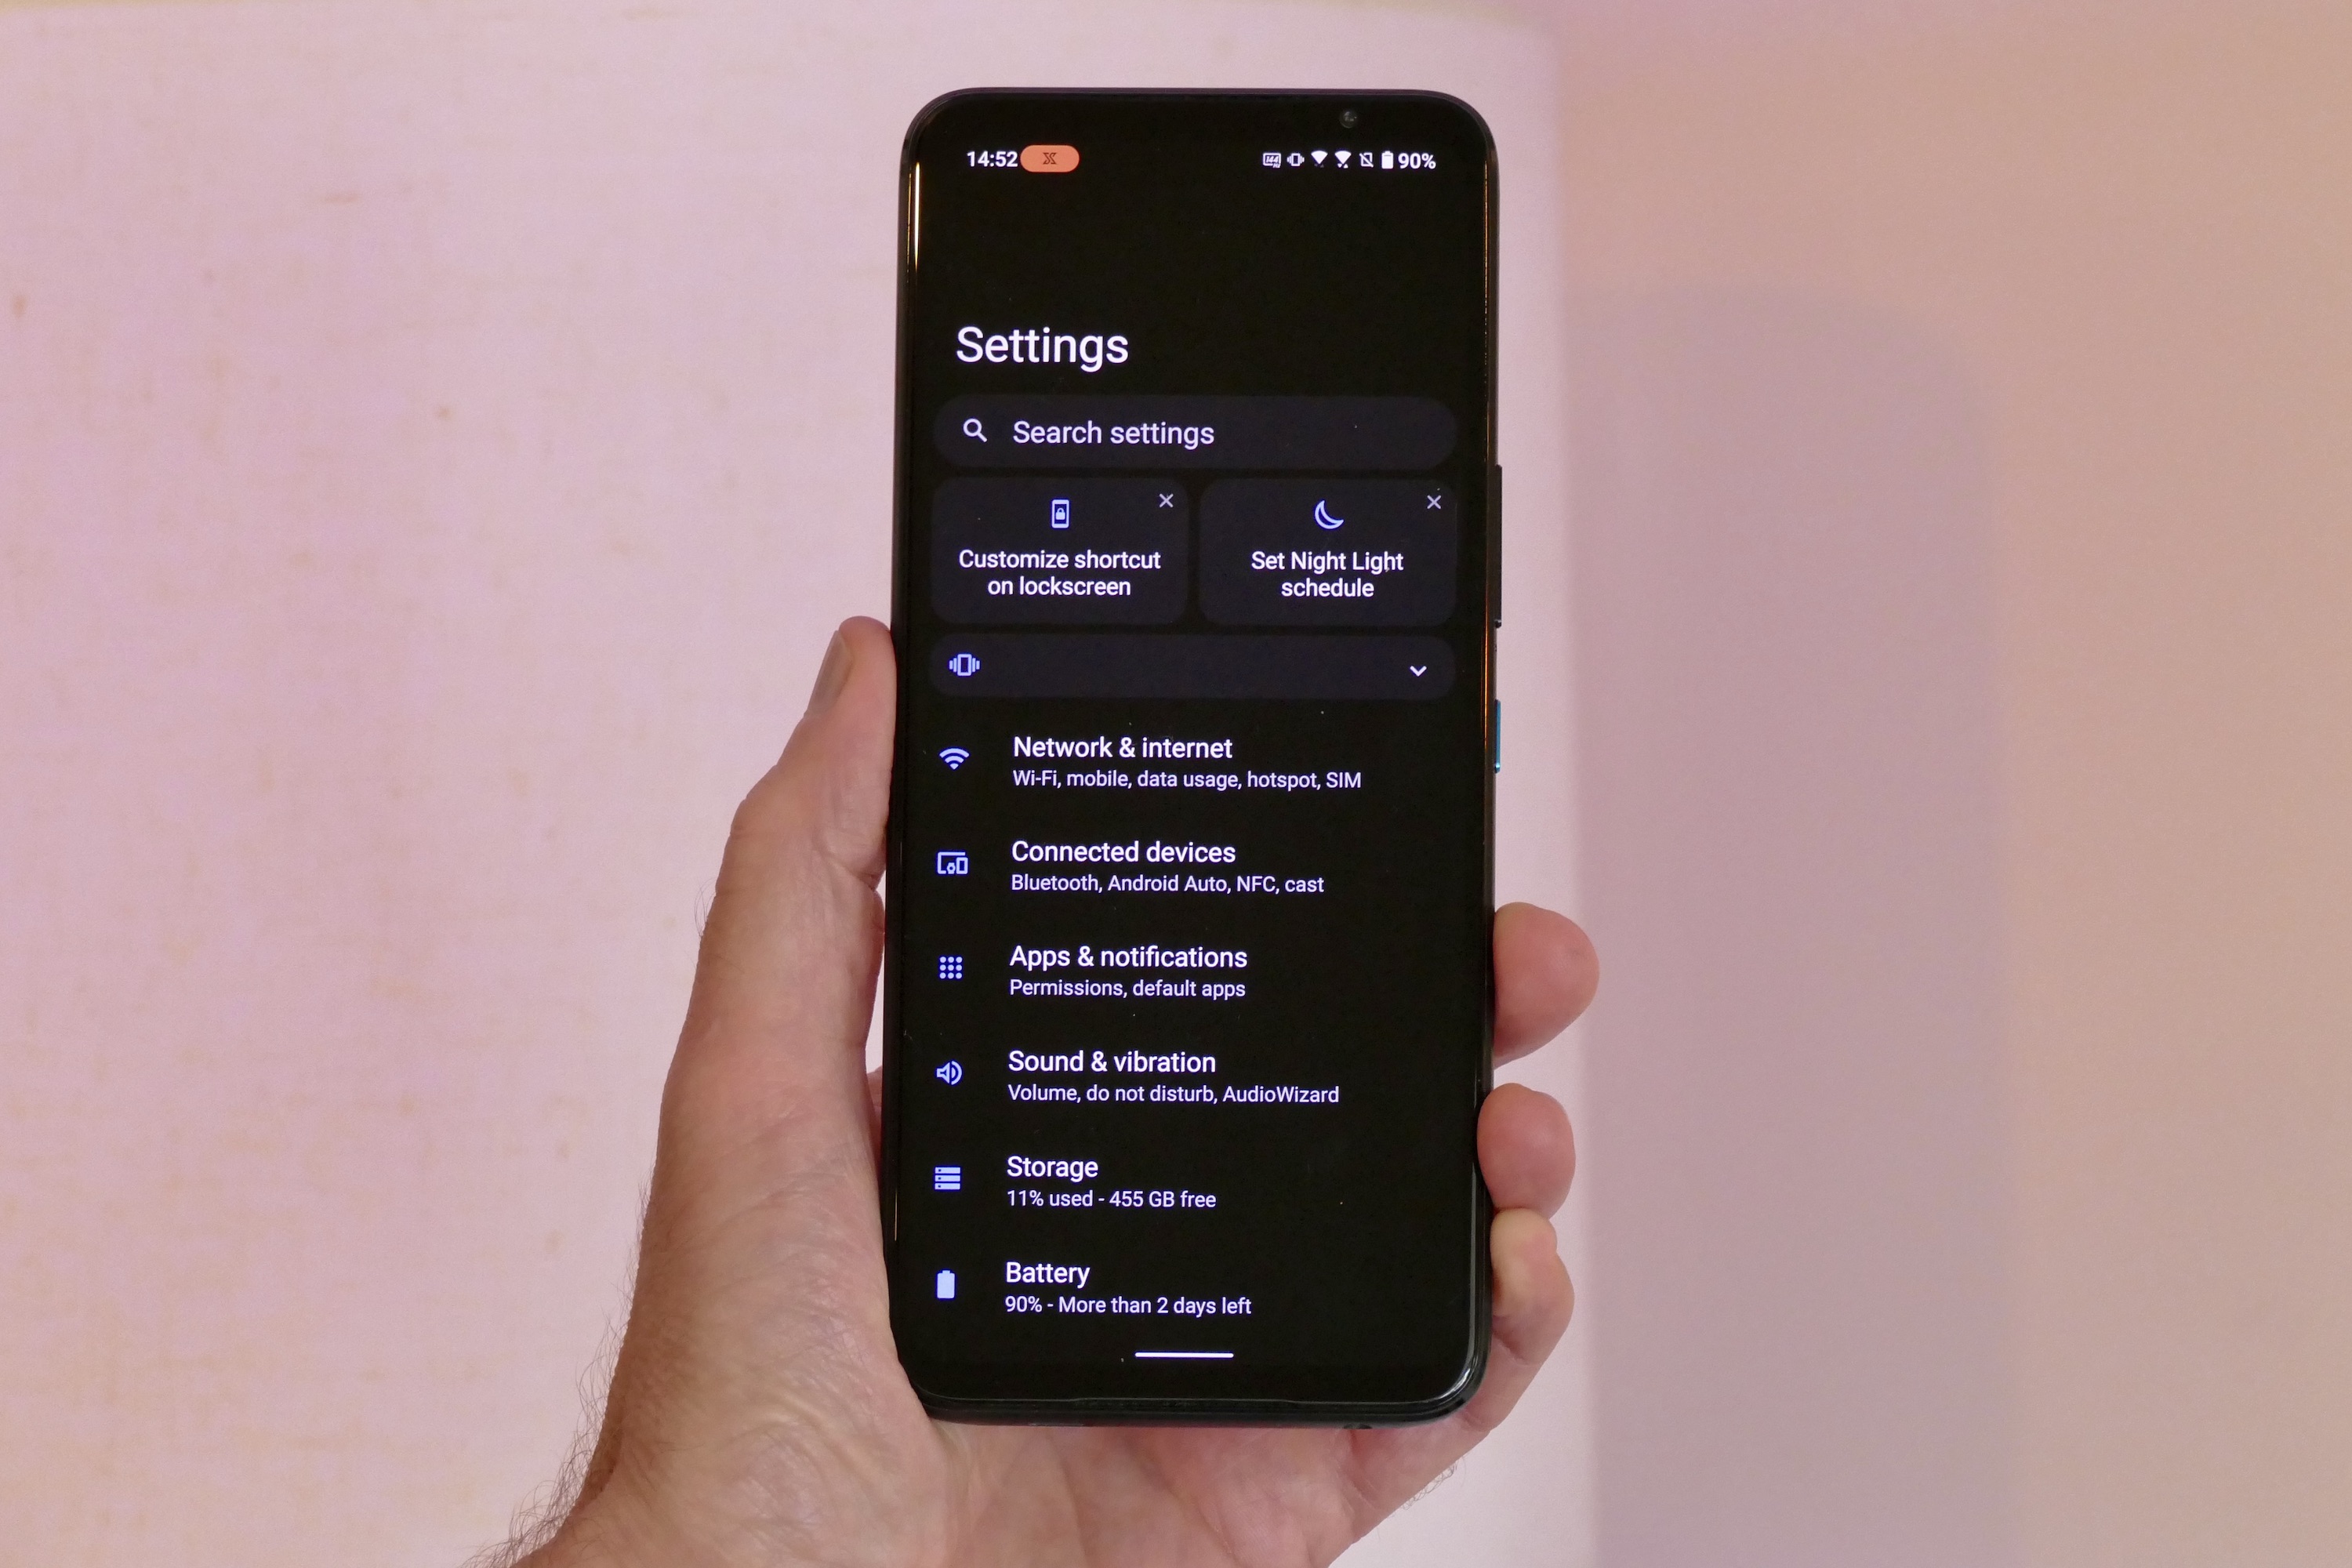 Settings screen on the Photo taken with the Asus ROG Phone 6 Pro.